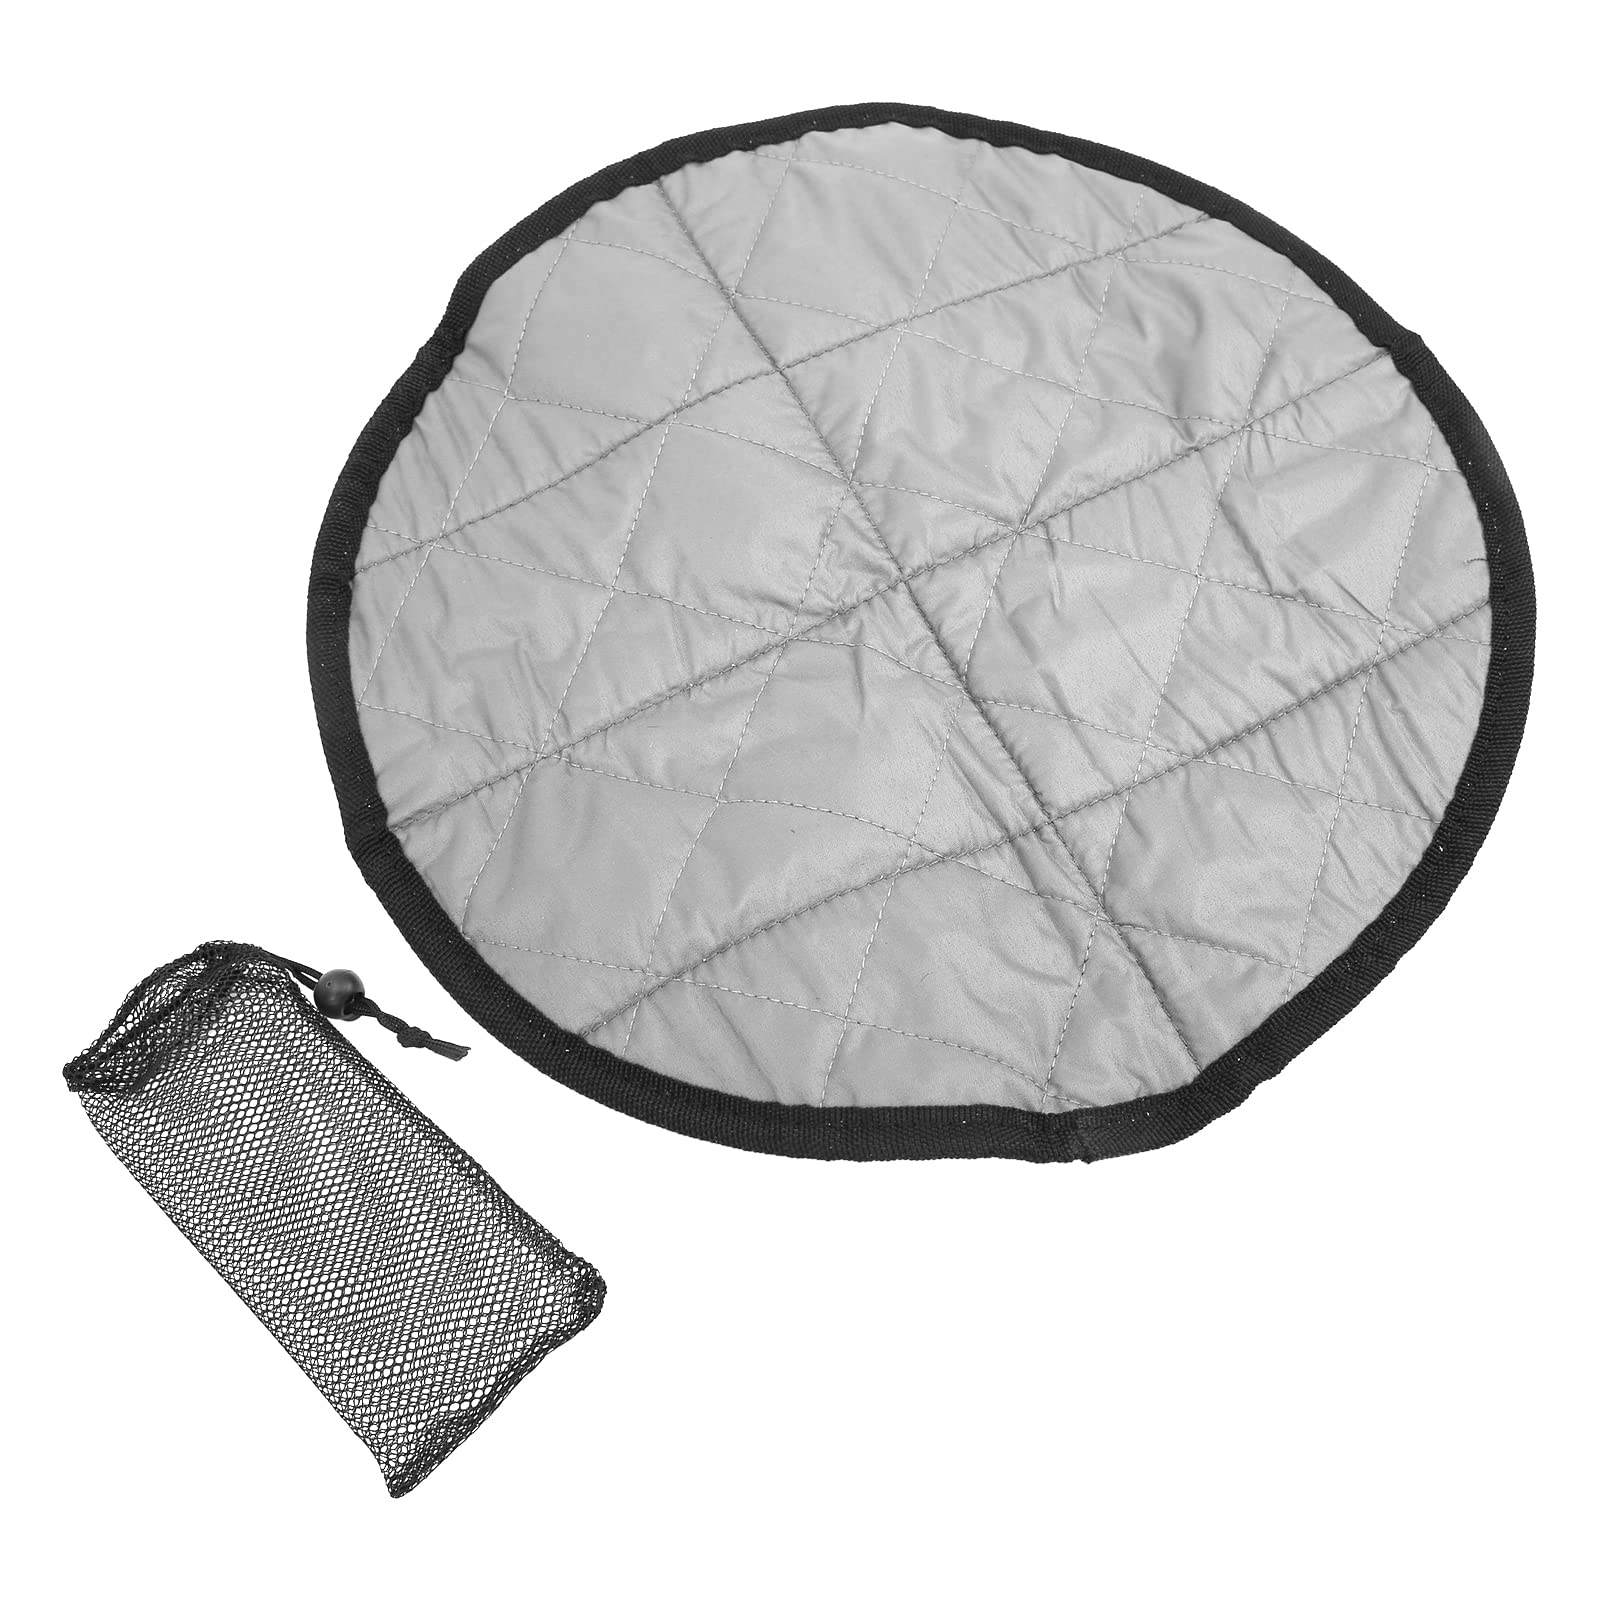 Qqmora Portable Seat Cushion, Moistureproof Rollable Circle Portable Seat  Pad for Outdoor Travel for Park Picnic Grey